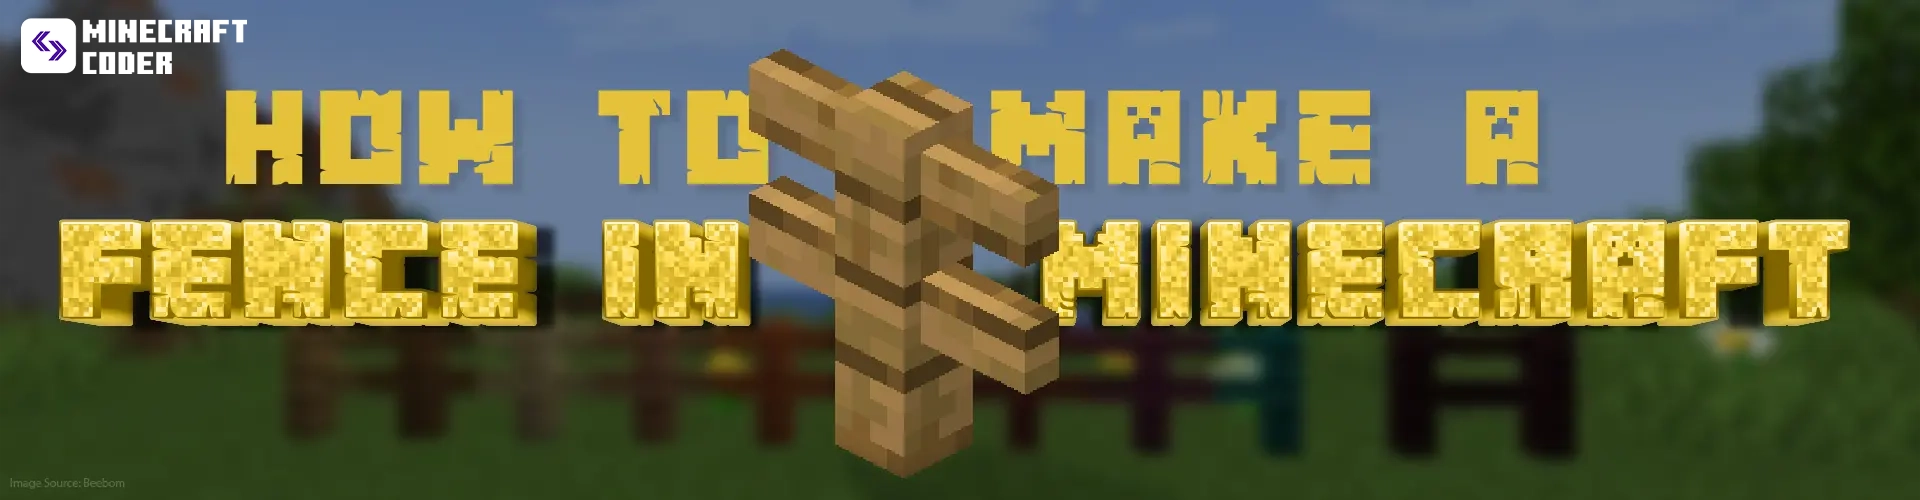 Make a Fence in Minecraft